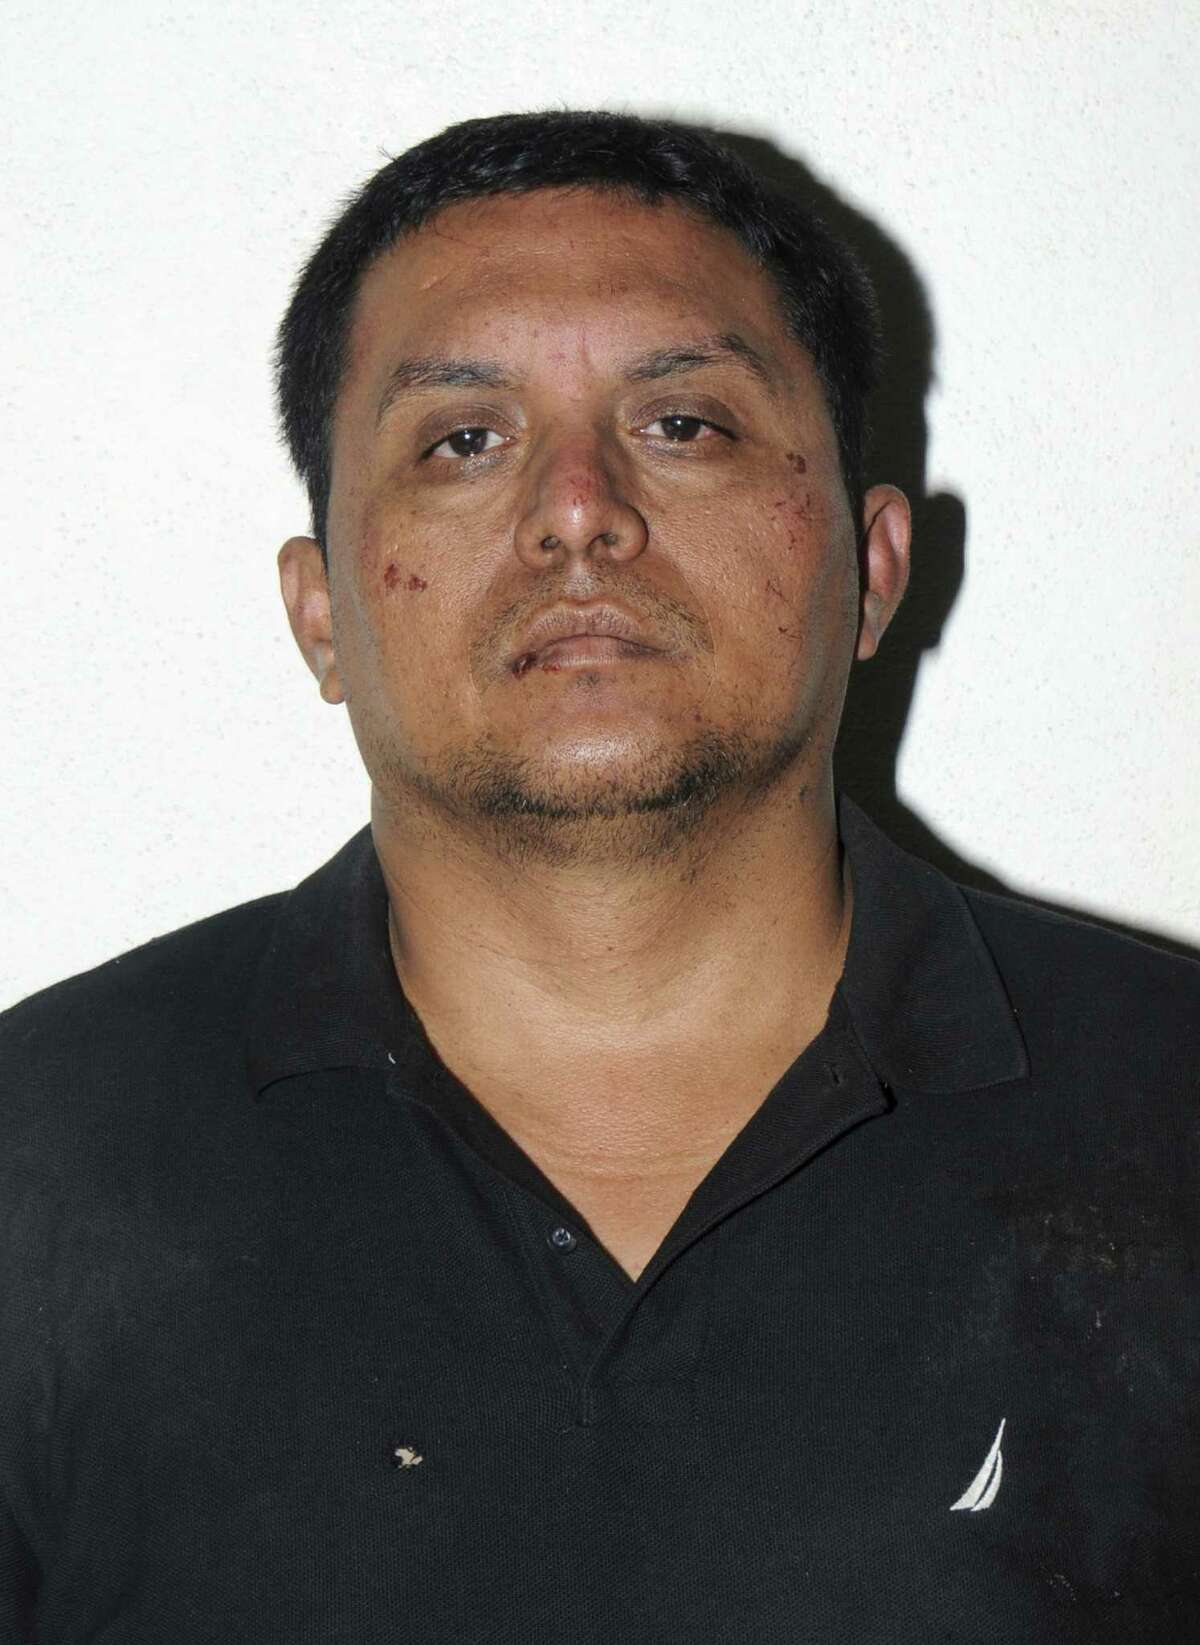 Prosecutors say Miguel Treviño Morales laundered money by breeding and racing horses.